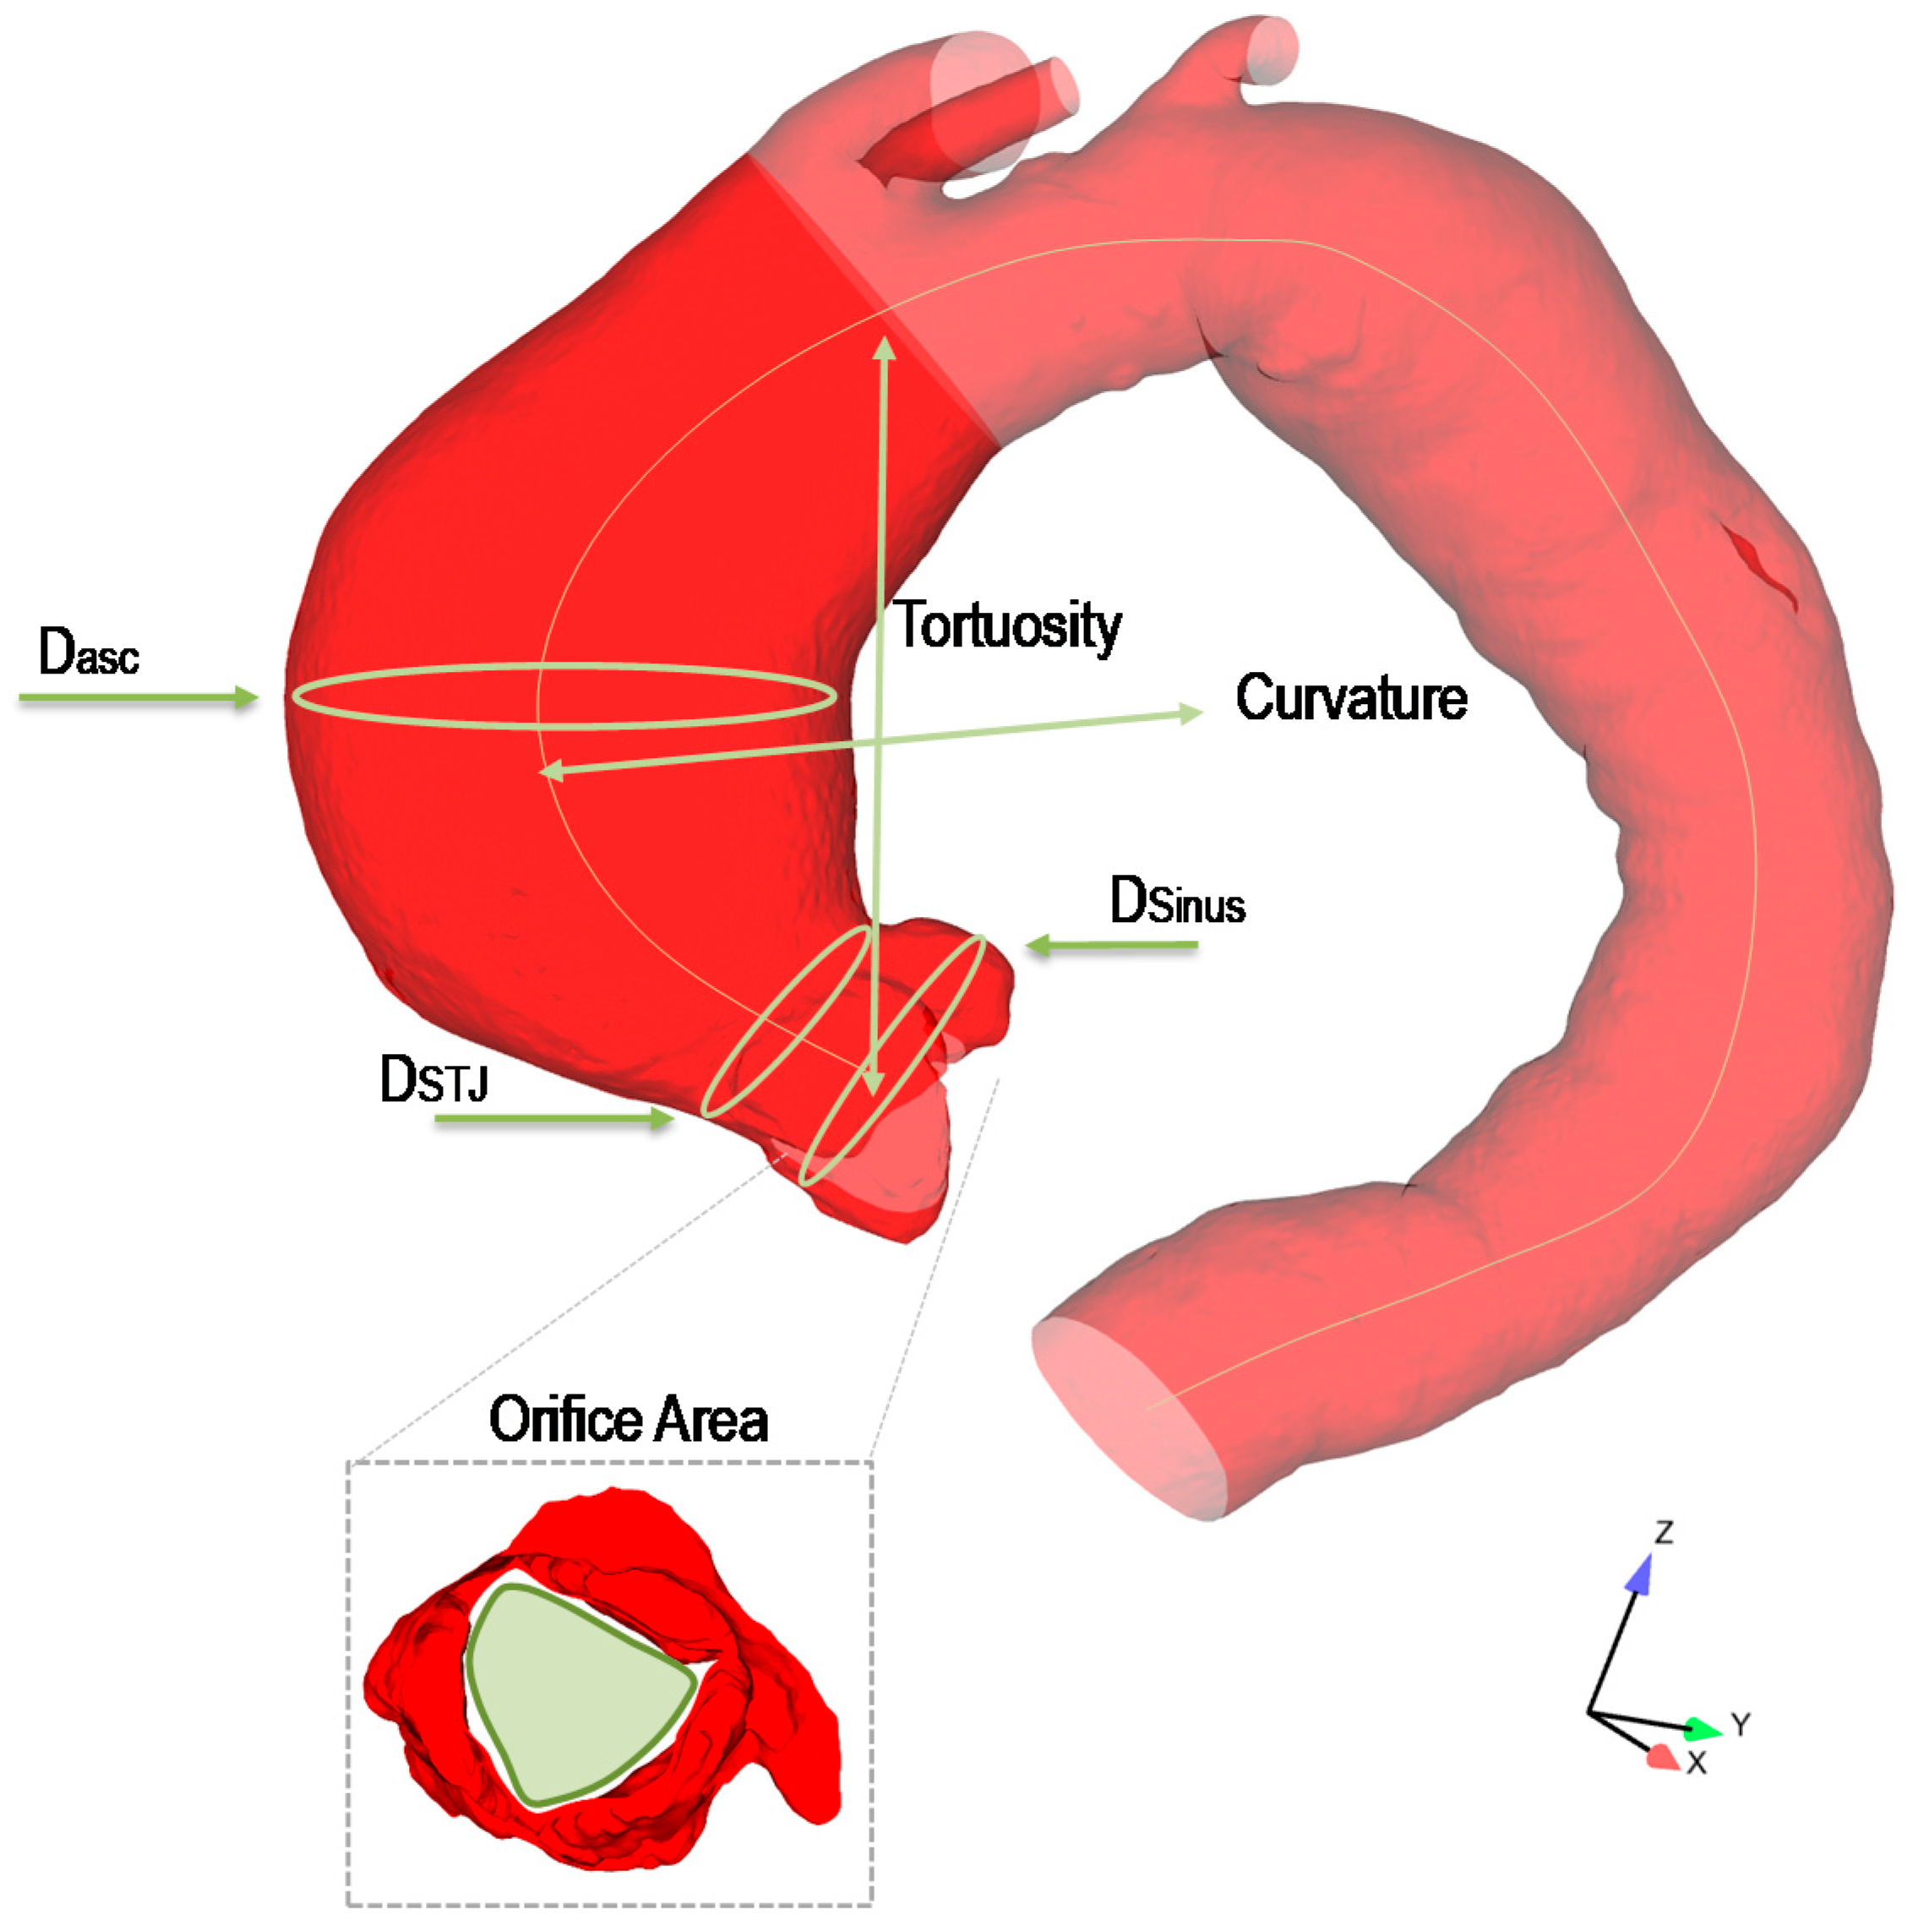 normal size of ascending aorta